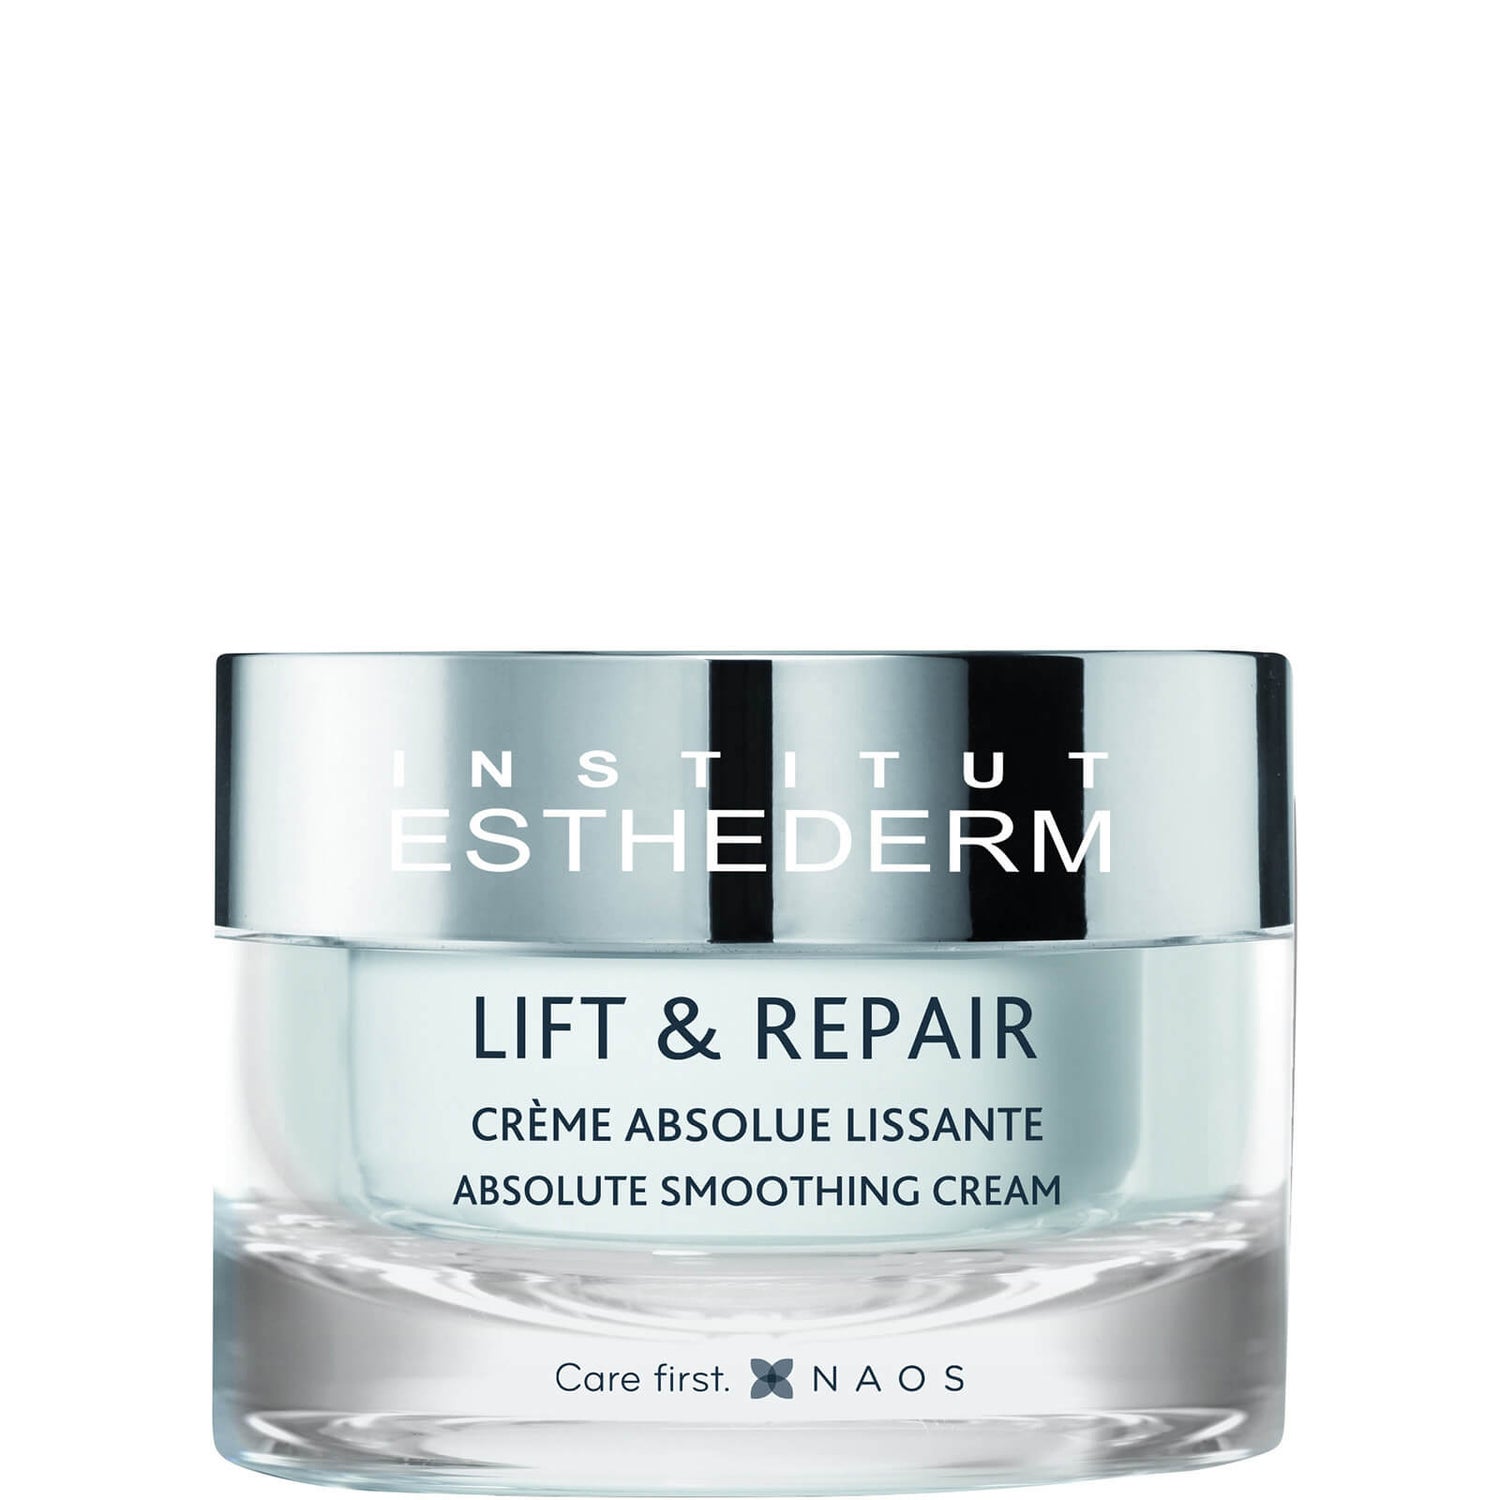 Institut Esthederm Absolute Smoothing Cream 50ml